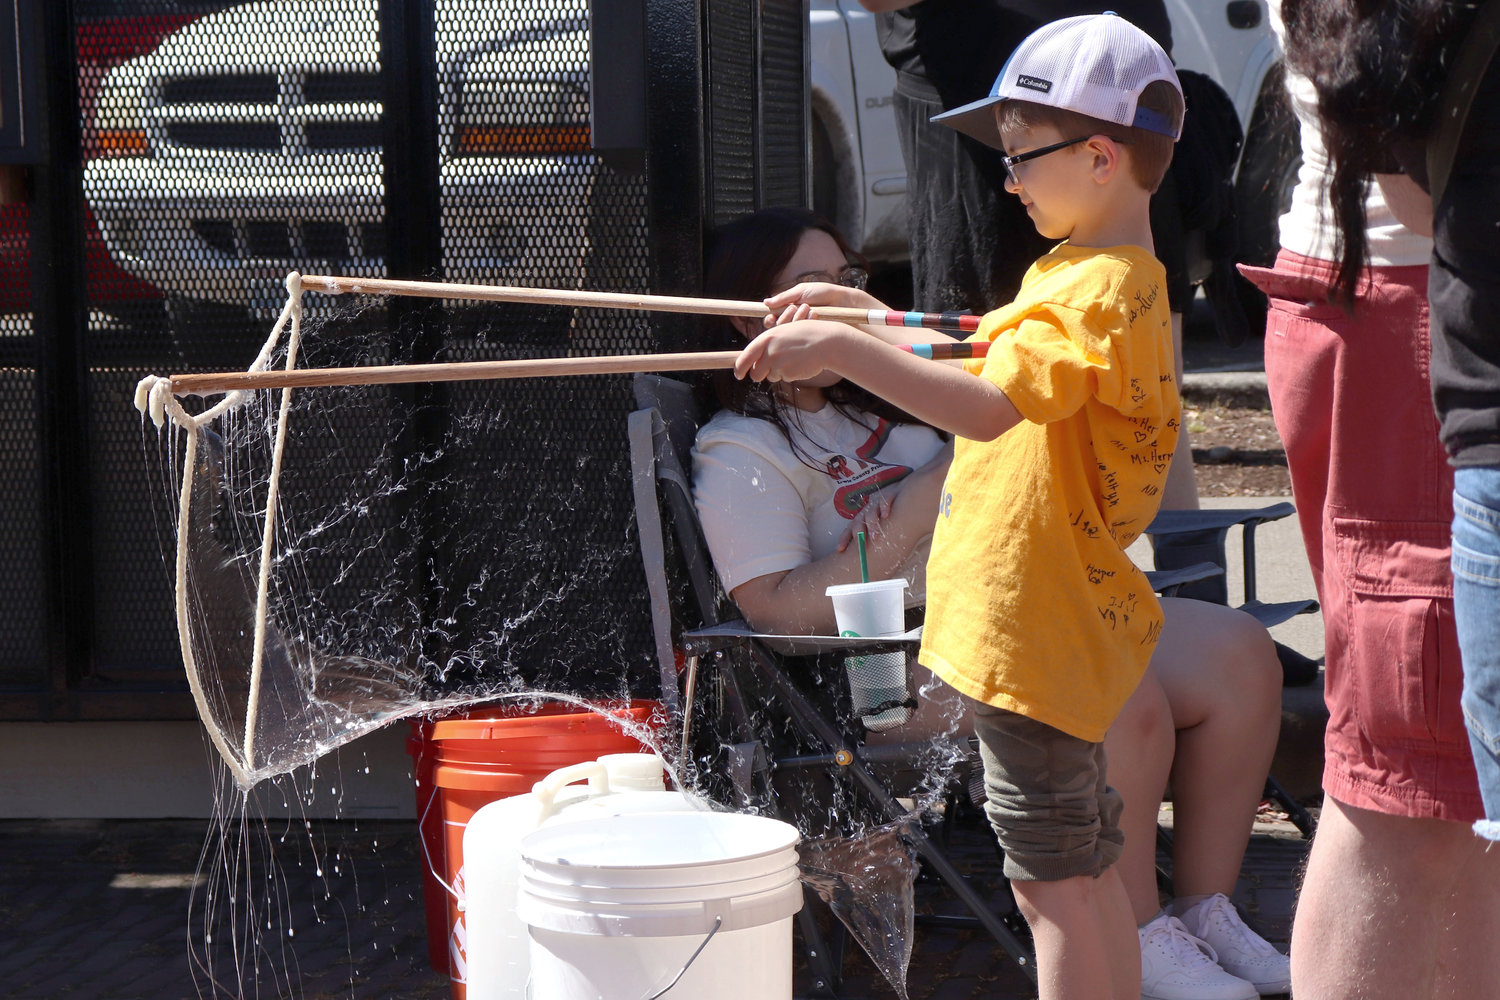 Stanford Castonguay, 7, doesn’t react as his giant bubble pops during Lewis County Pride in Centralia on Saturday.